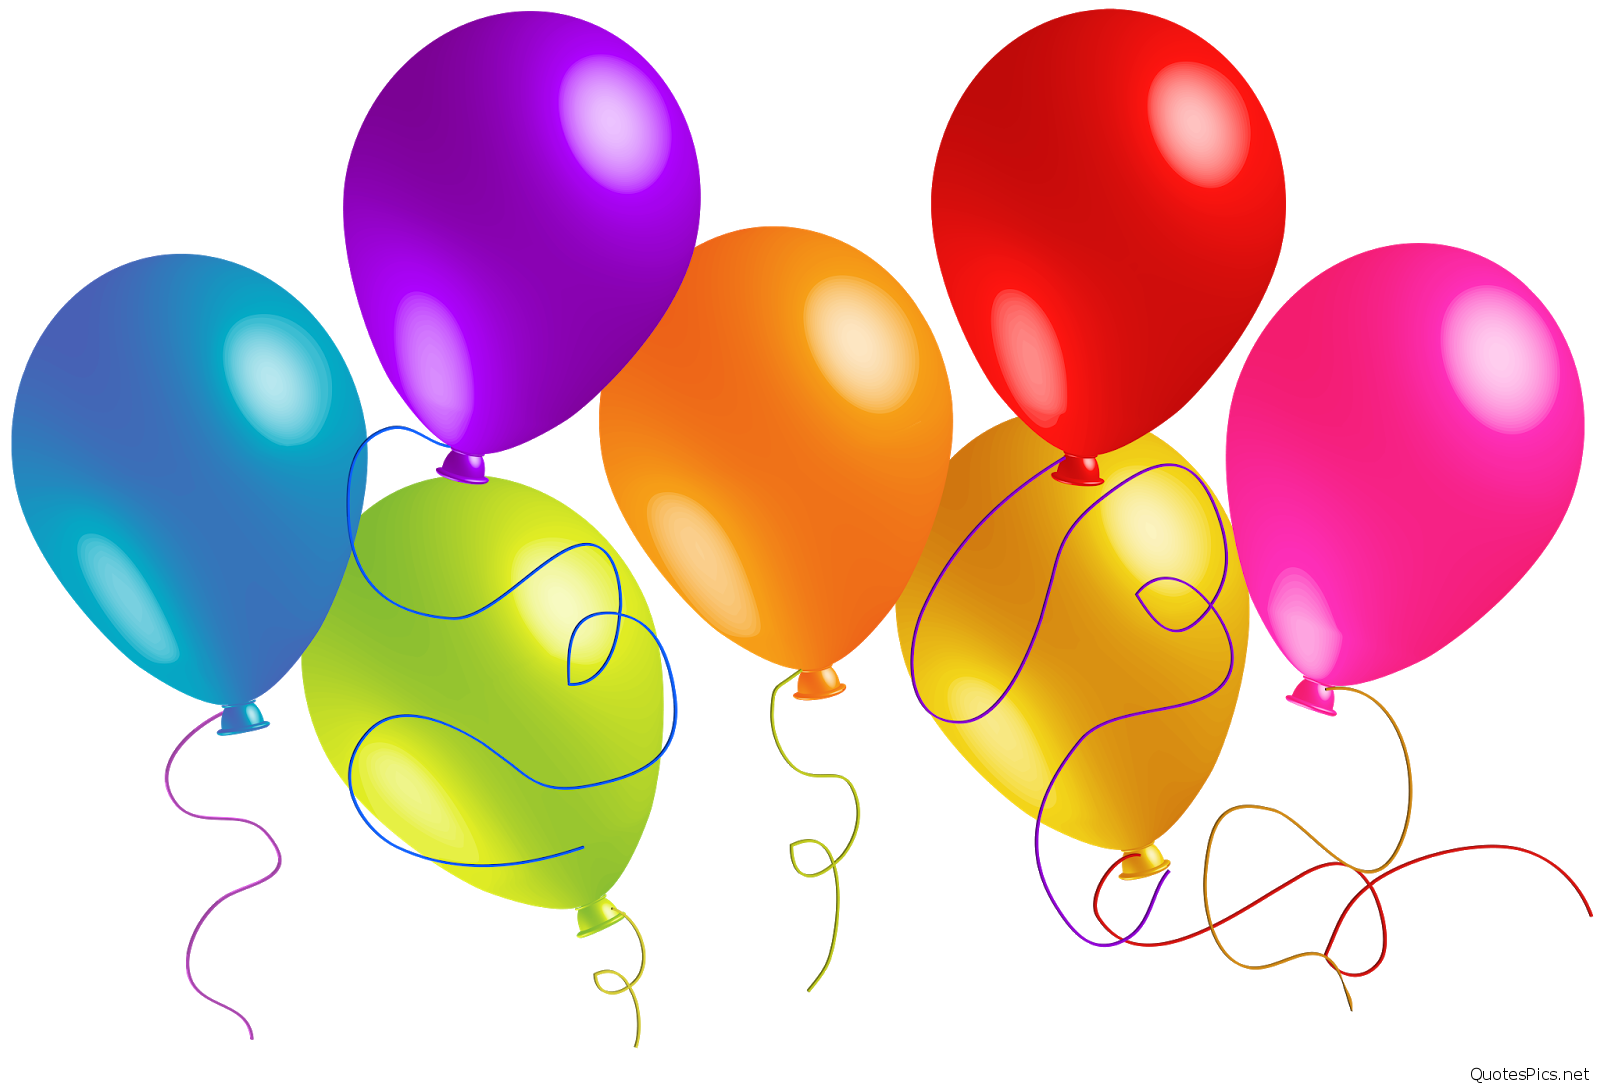 transparent background balloons clipart - Clip Art Library